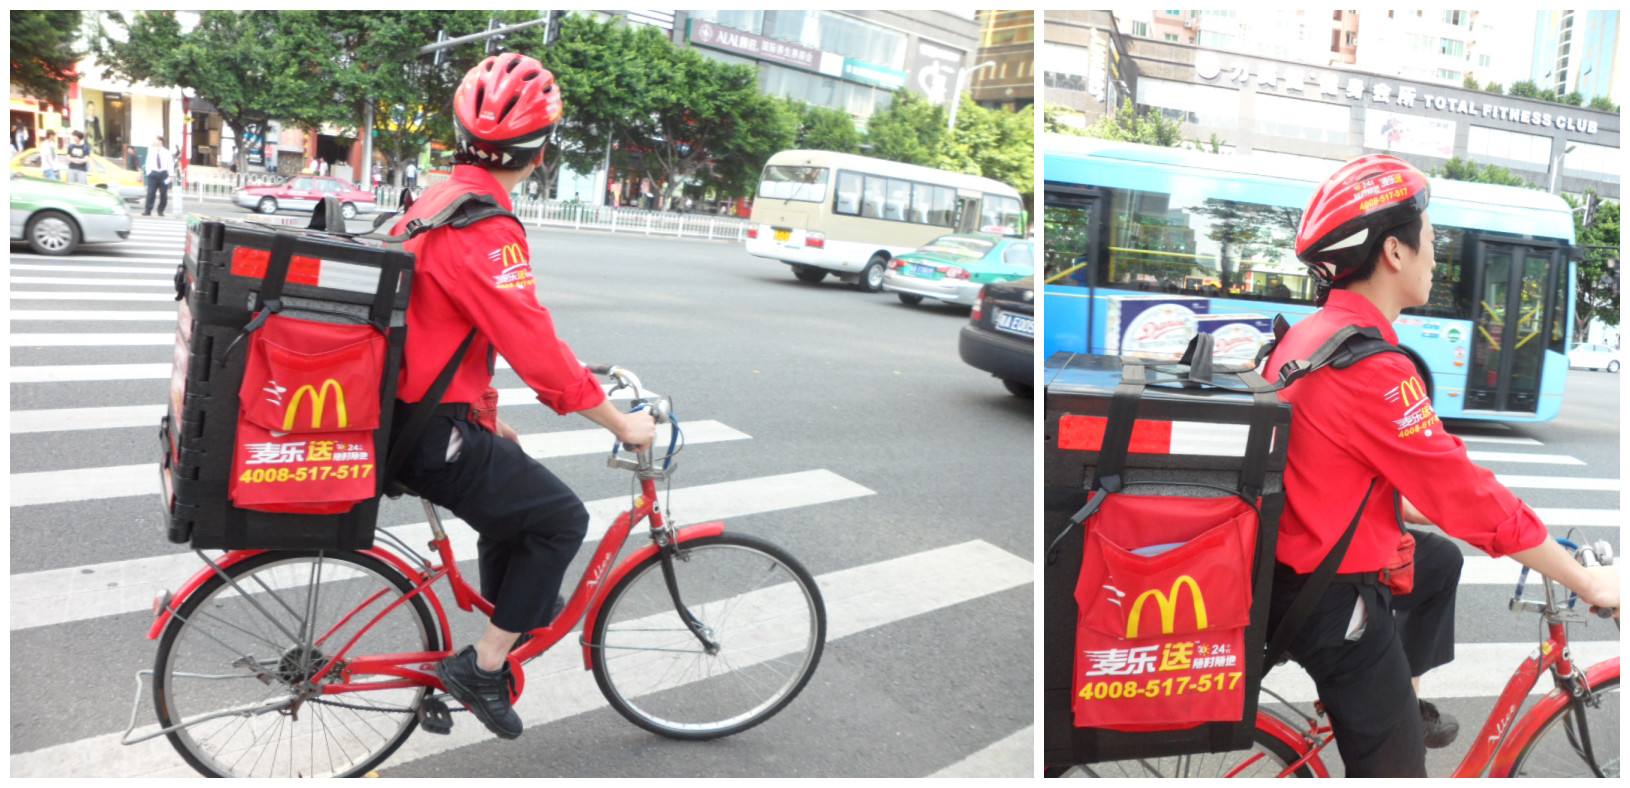 McDonald’s sells a delivery box in China because food delivery is so popular.